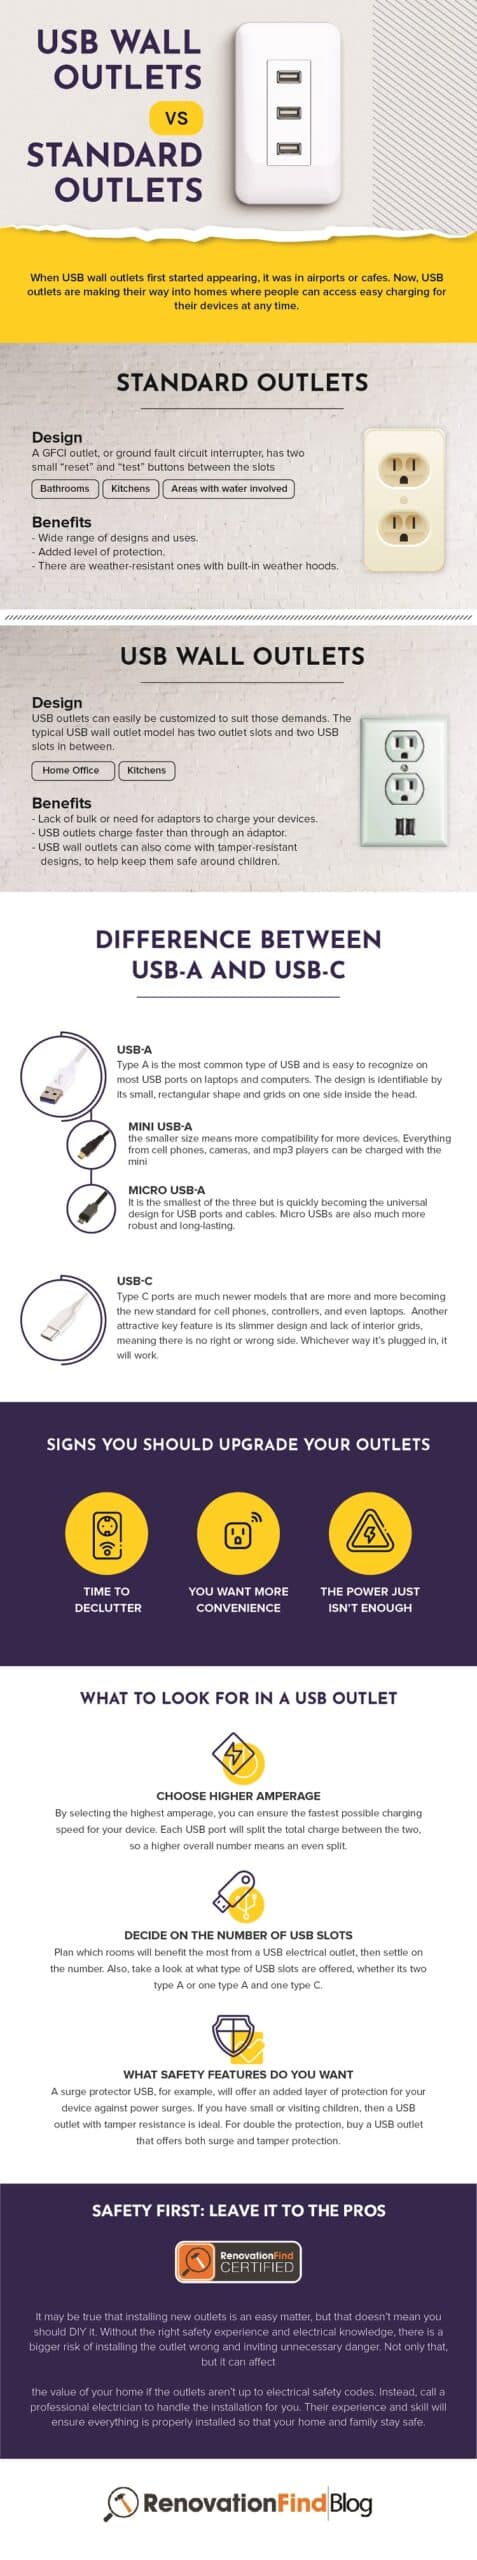 Infographic USB Wall Out lets VS Standard Outlets